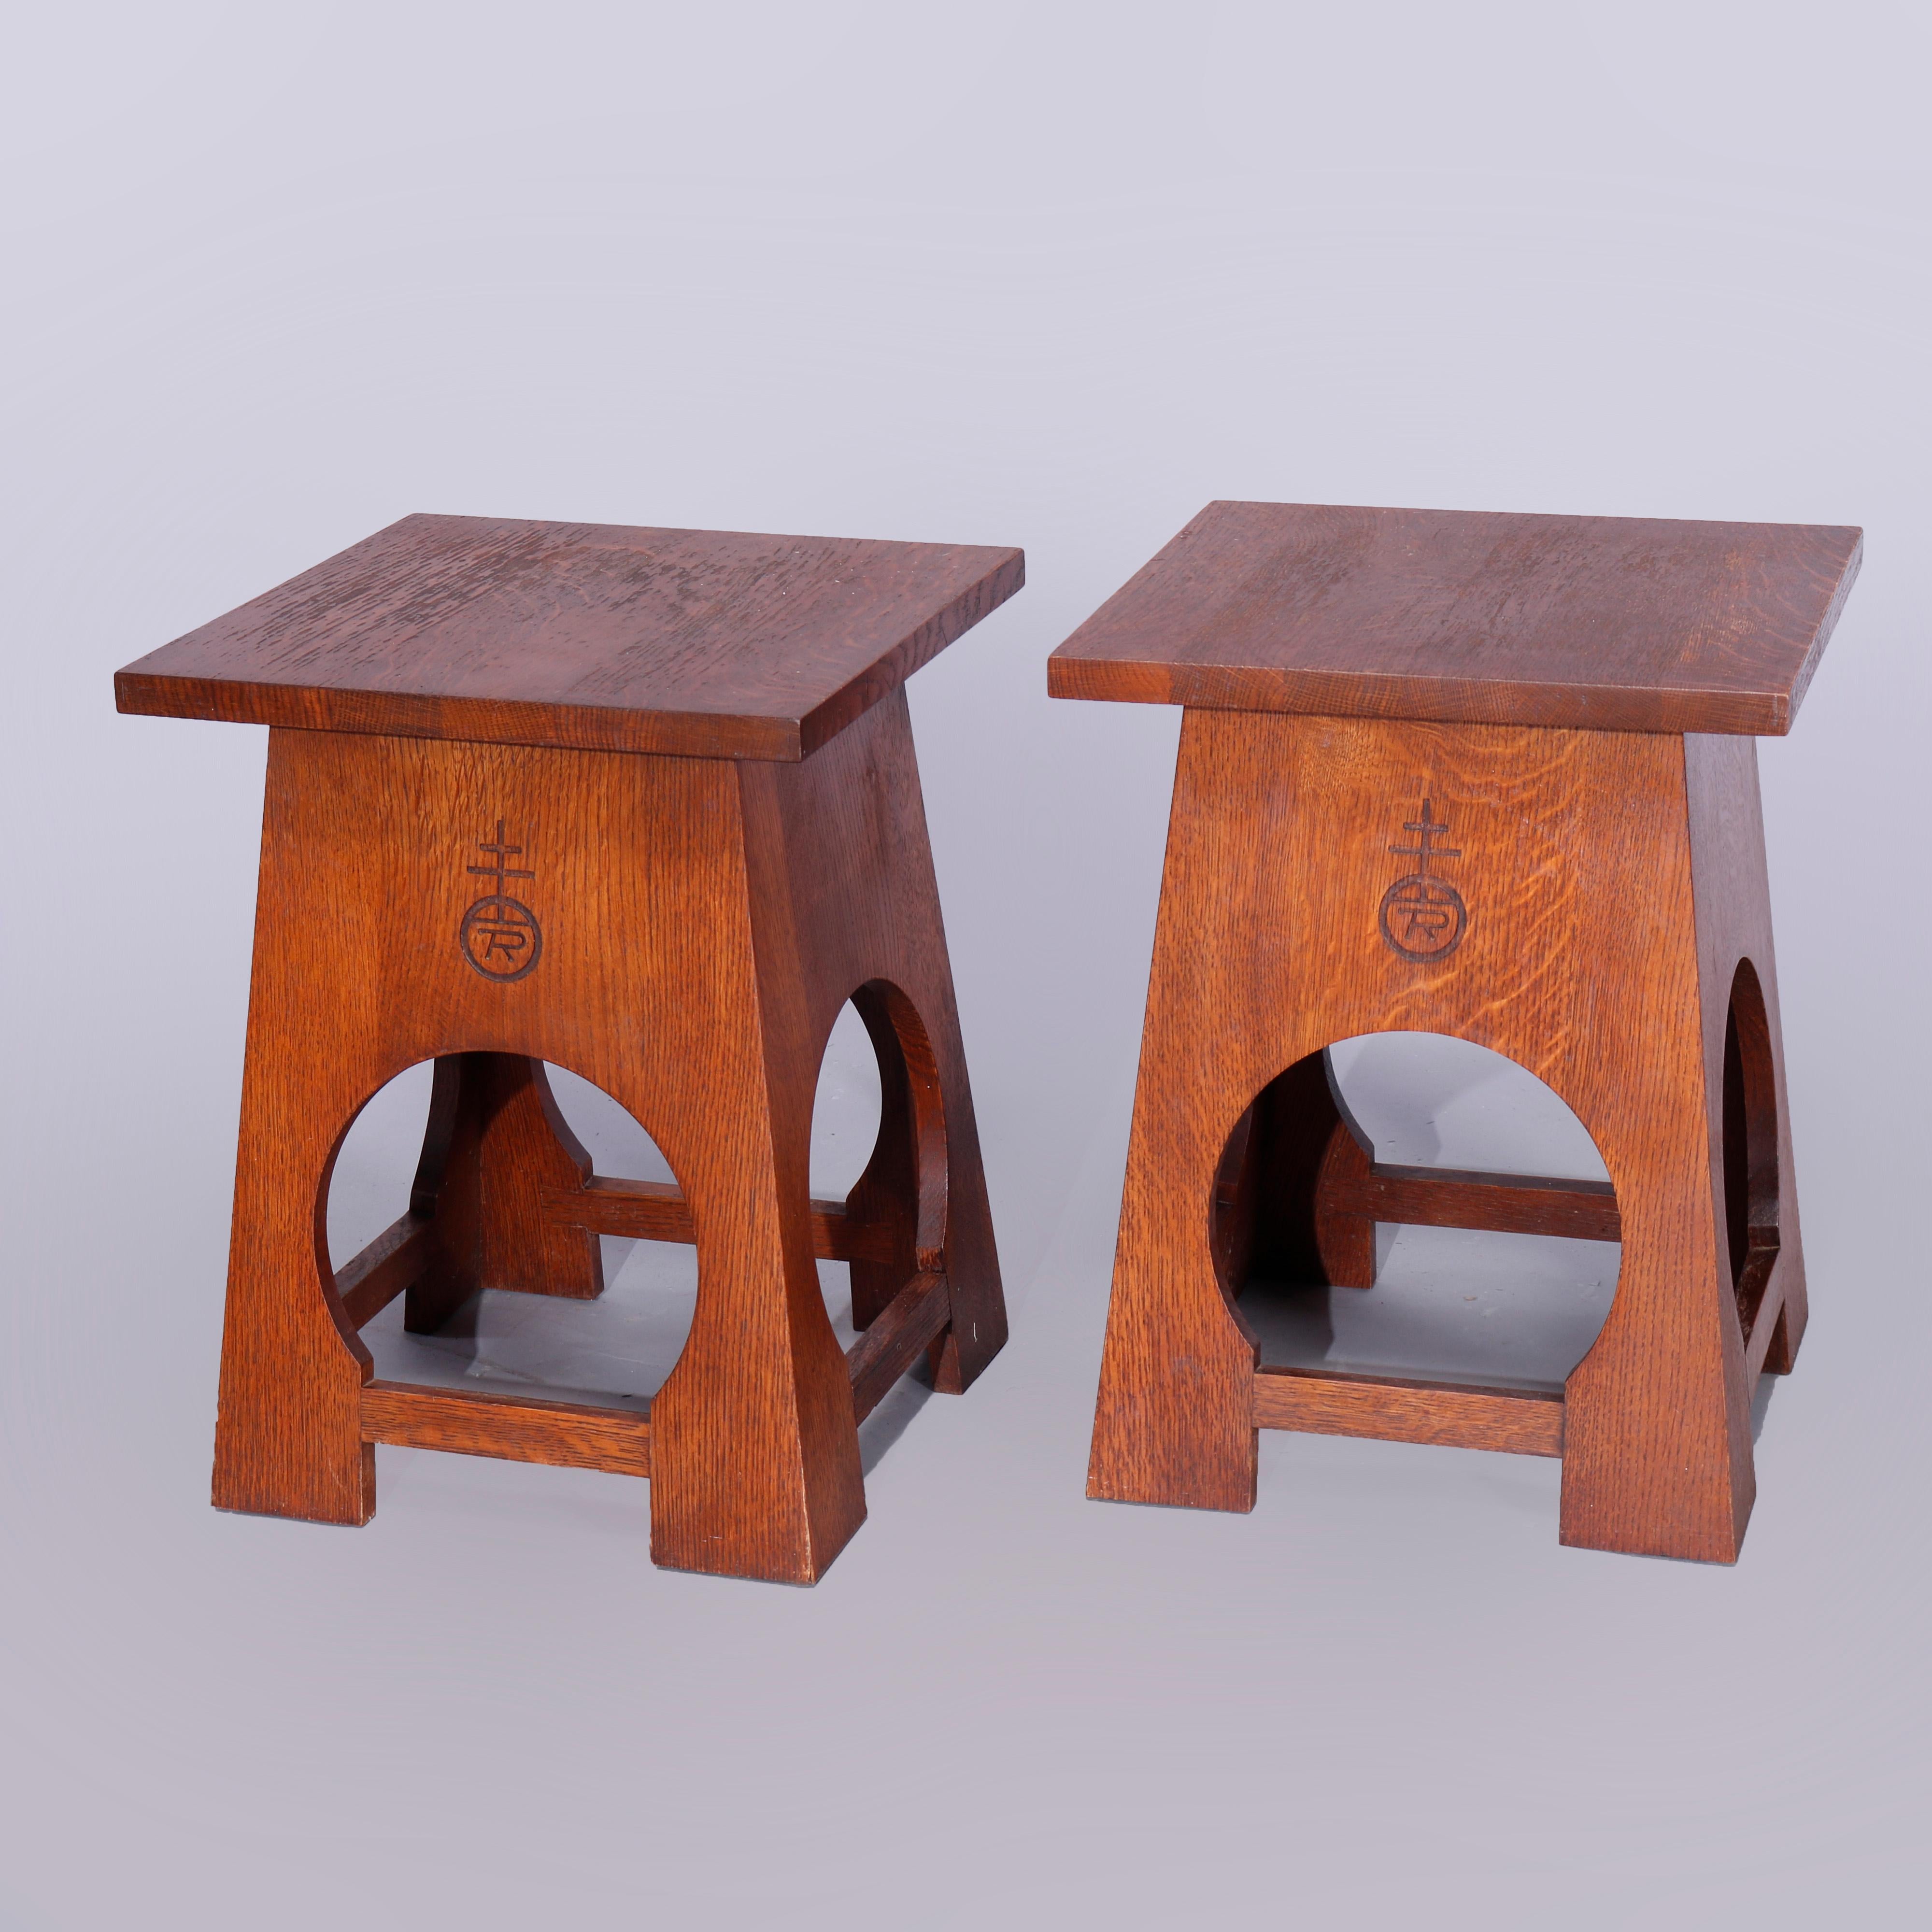 A pair of Roycroft Arts & Crafts Mission tabouret stands by Stickley offer oak construction with top surmounting flared bases with cutout legs, signed as photographed, 20th century

Measures: 20.25